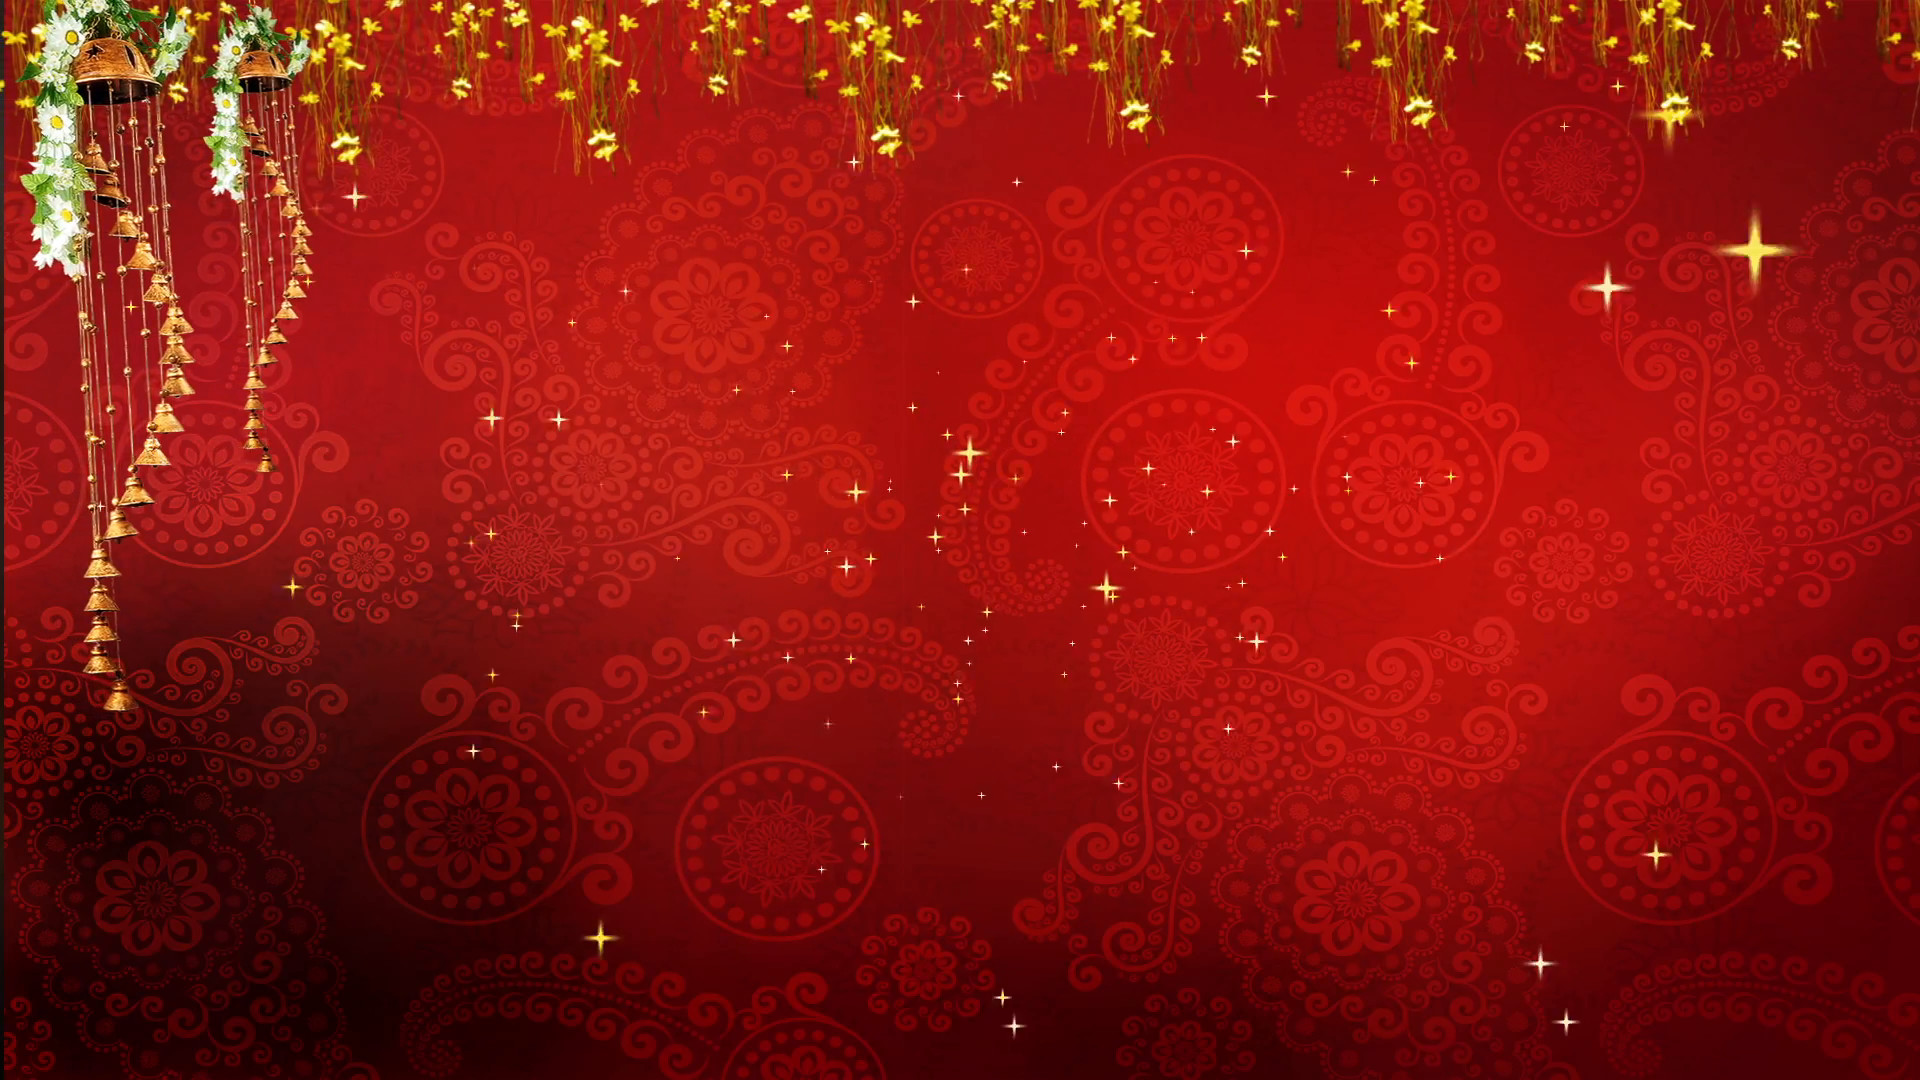 1920x1080 Abstract Festive Holiday Background 03